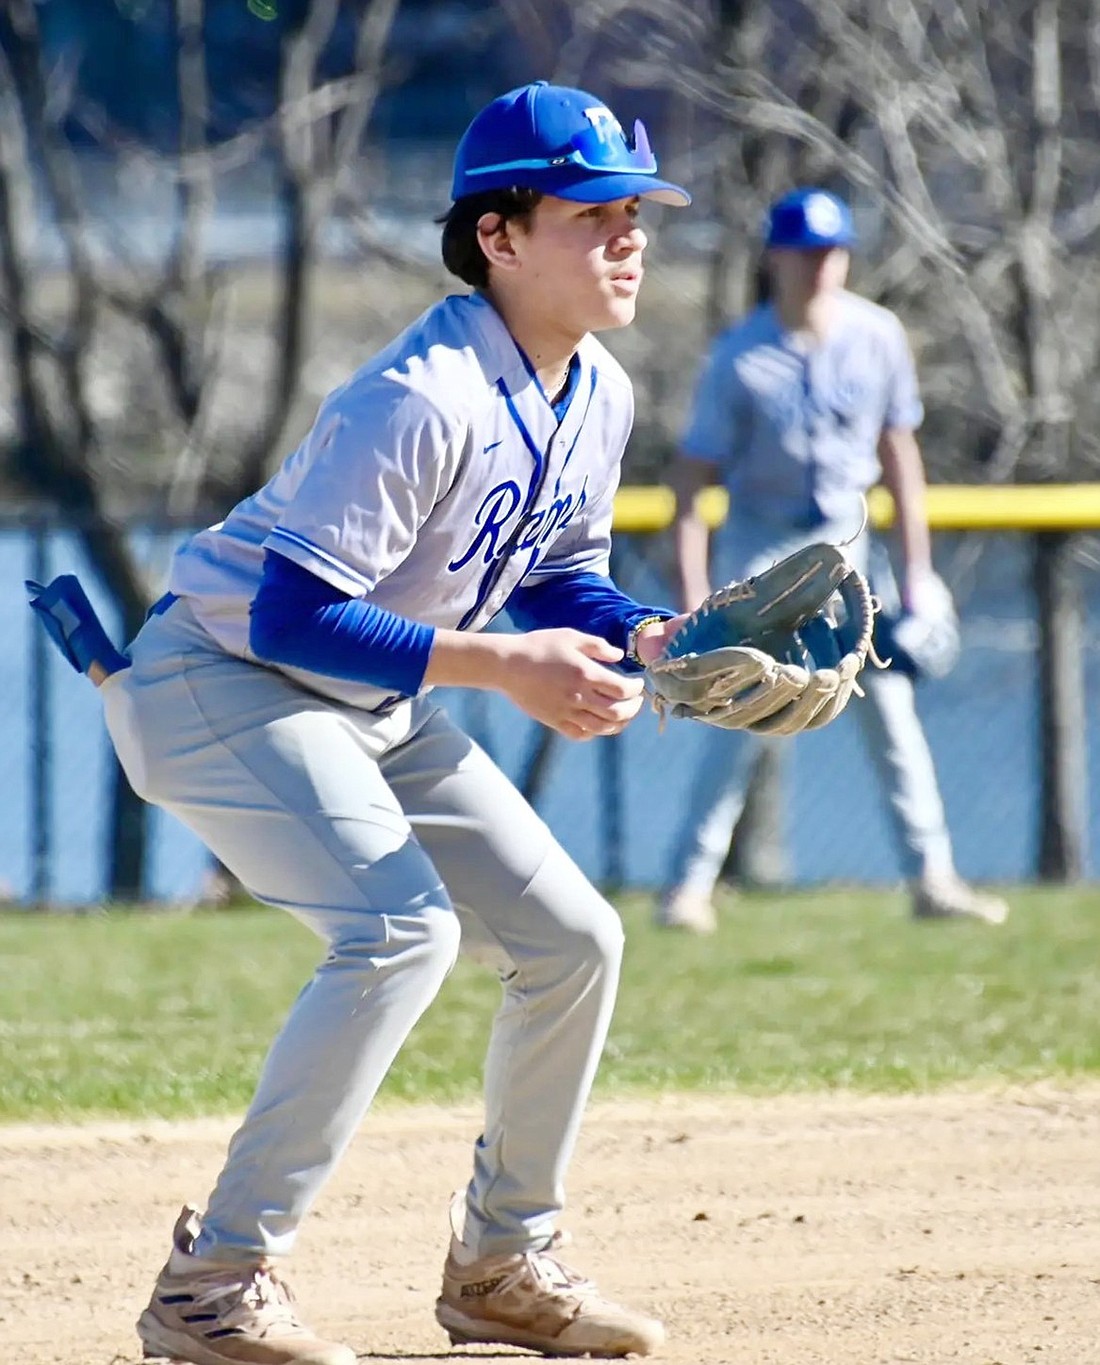 Eighth grader Adam Castaneda played second base in the Rams’ season-opening game against East Ramapo on Monday, Mar. 25. He went three for four in his varsity debut, a 14-0 shutout of the Titans.